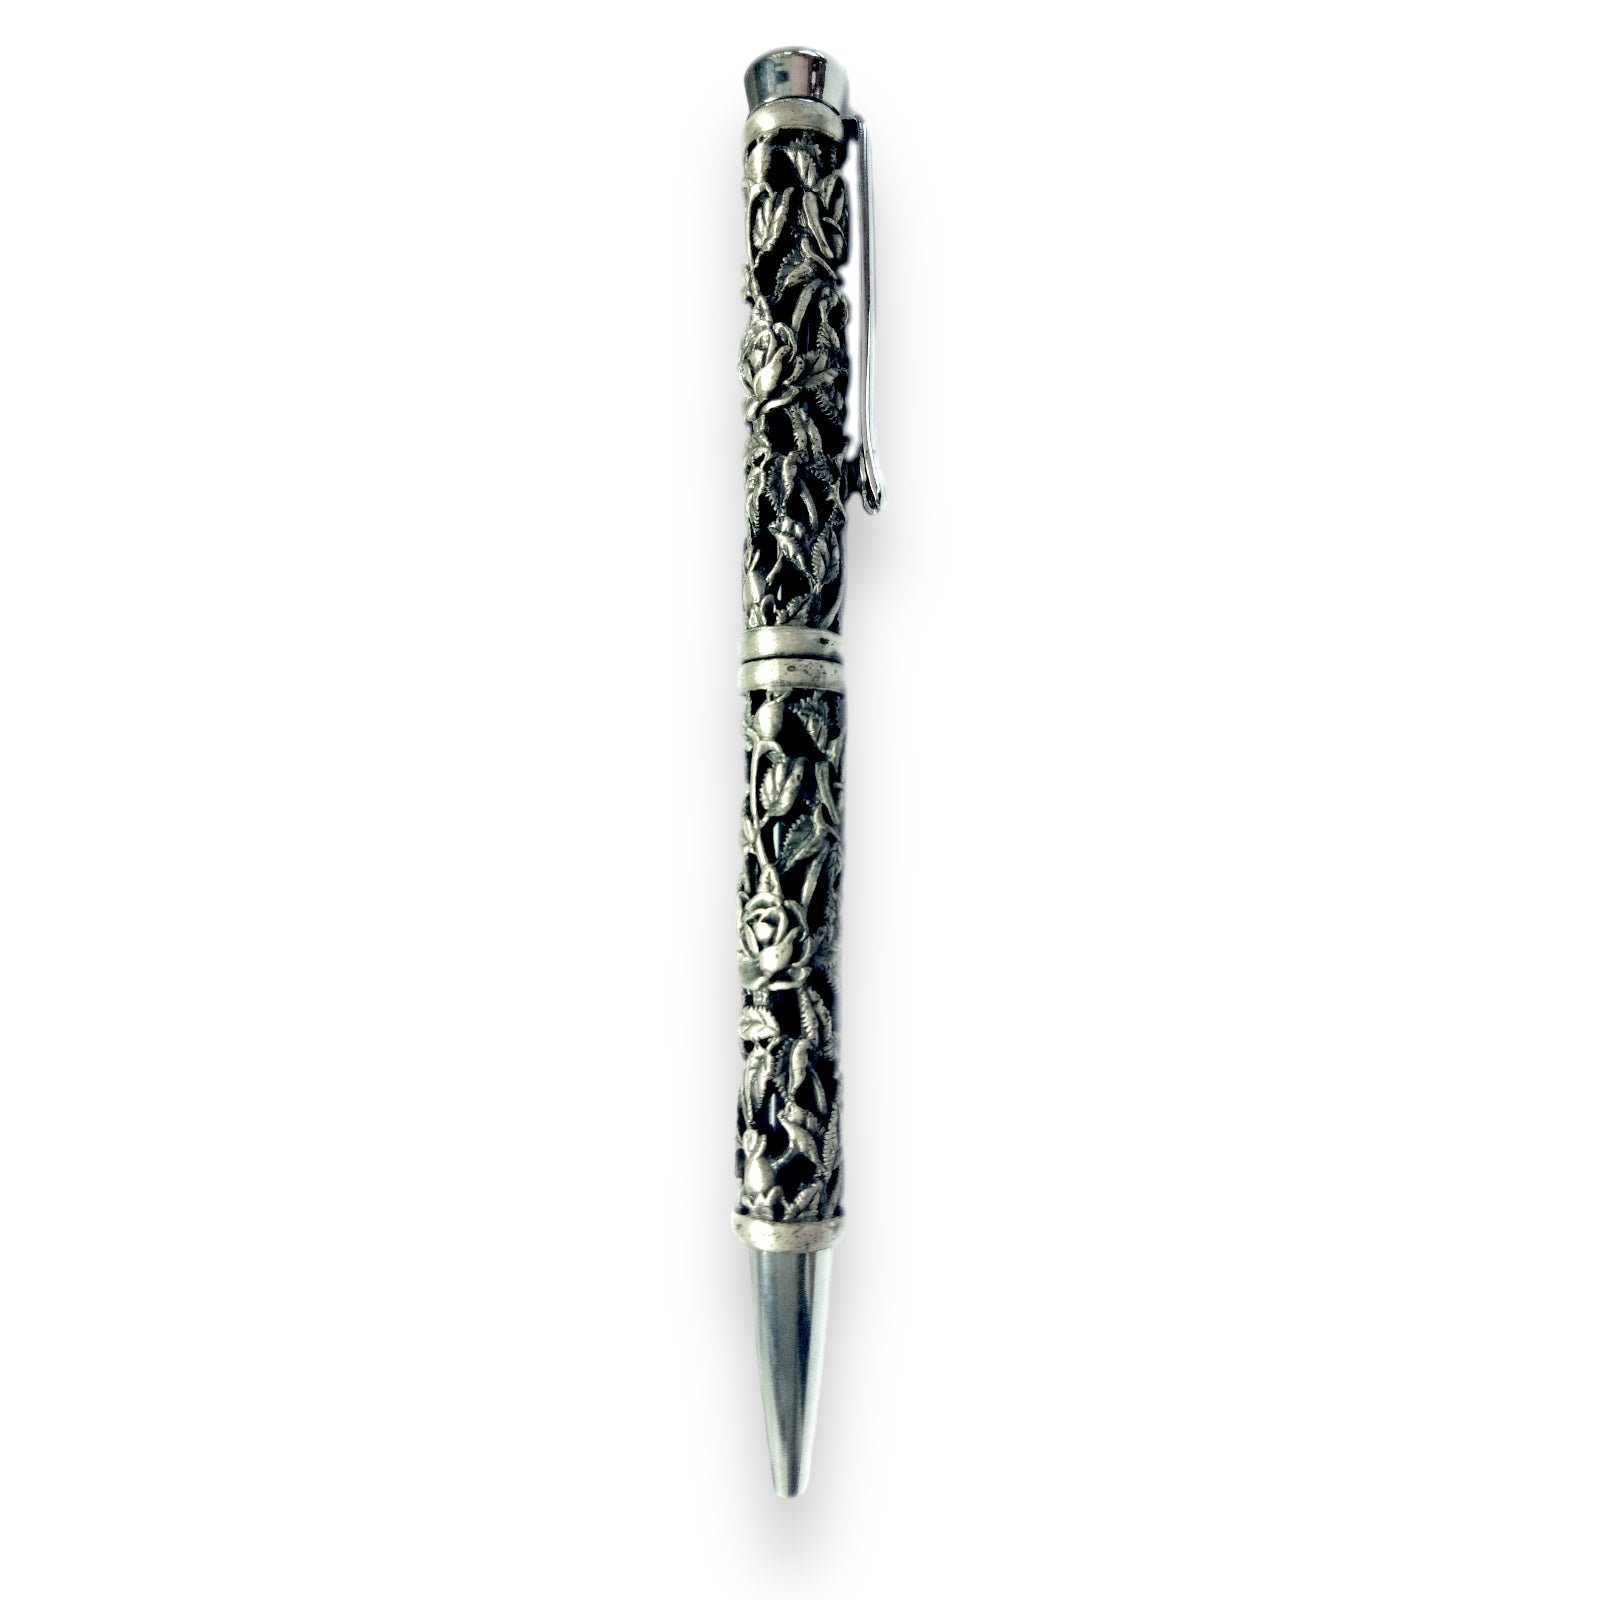 Luxury Black Handcrafted Writing Pen With Unique Silver Embossed Carving